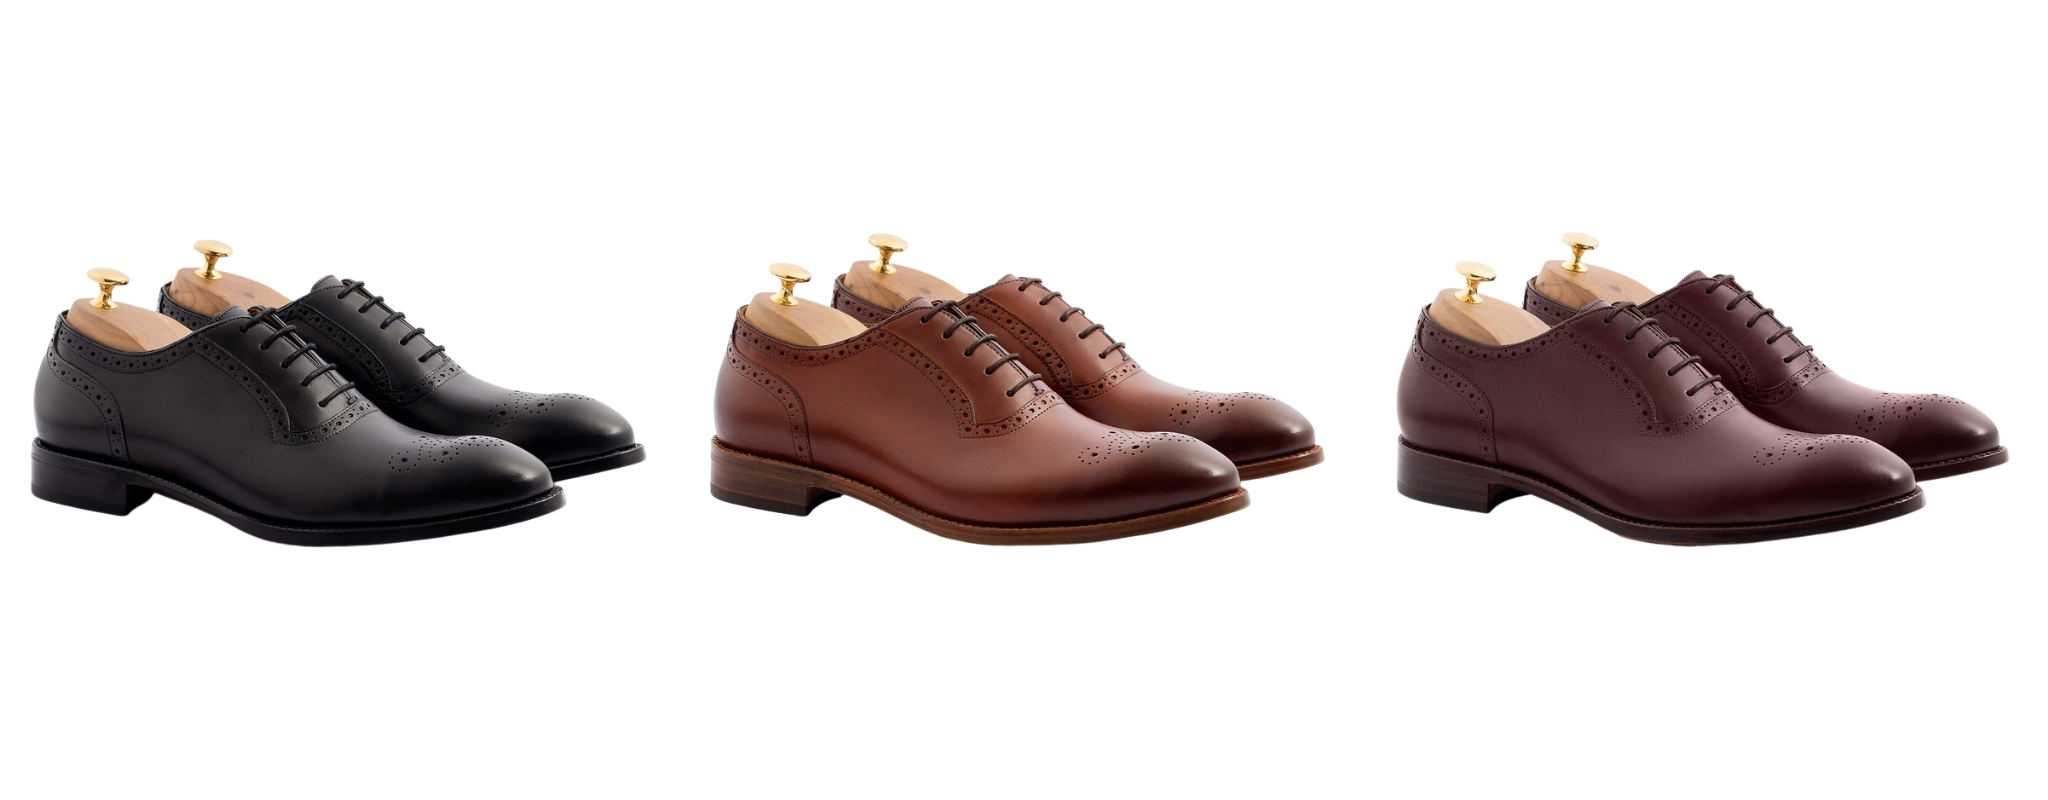 black, brown and burgundy dress shoes to wear with gray suit